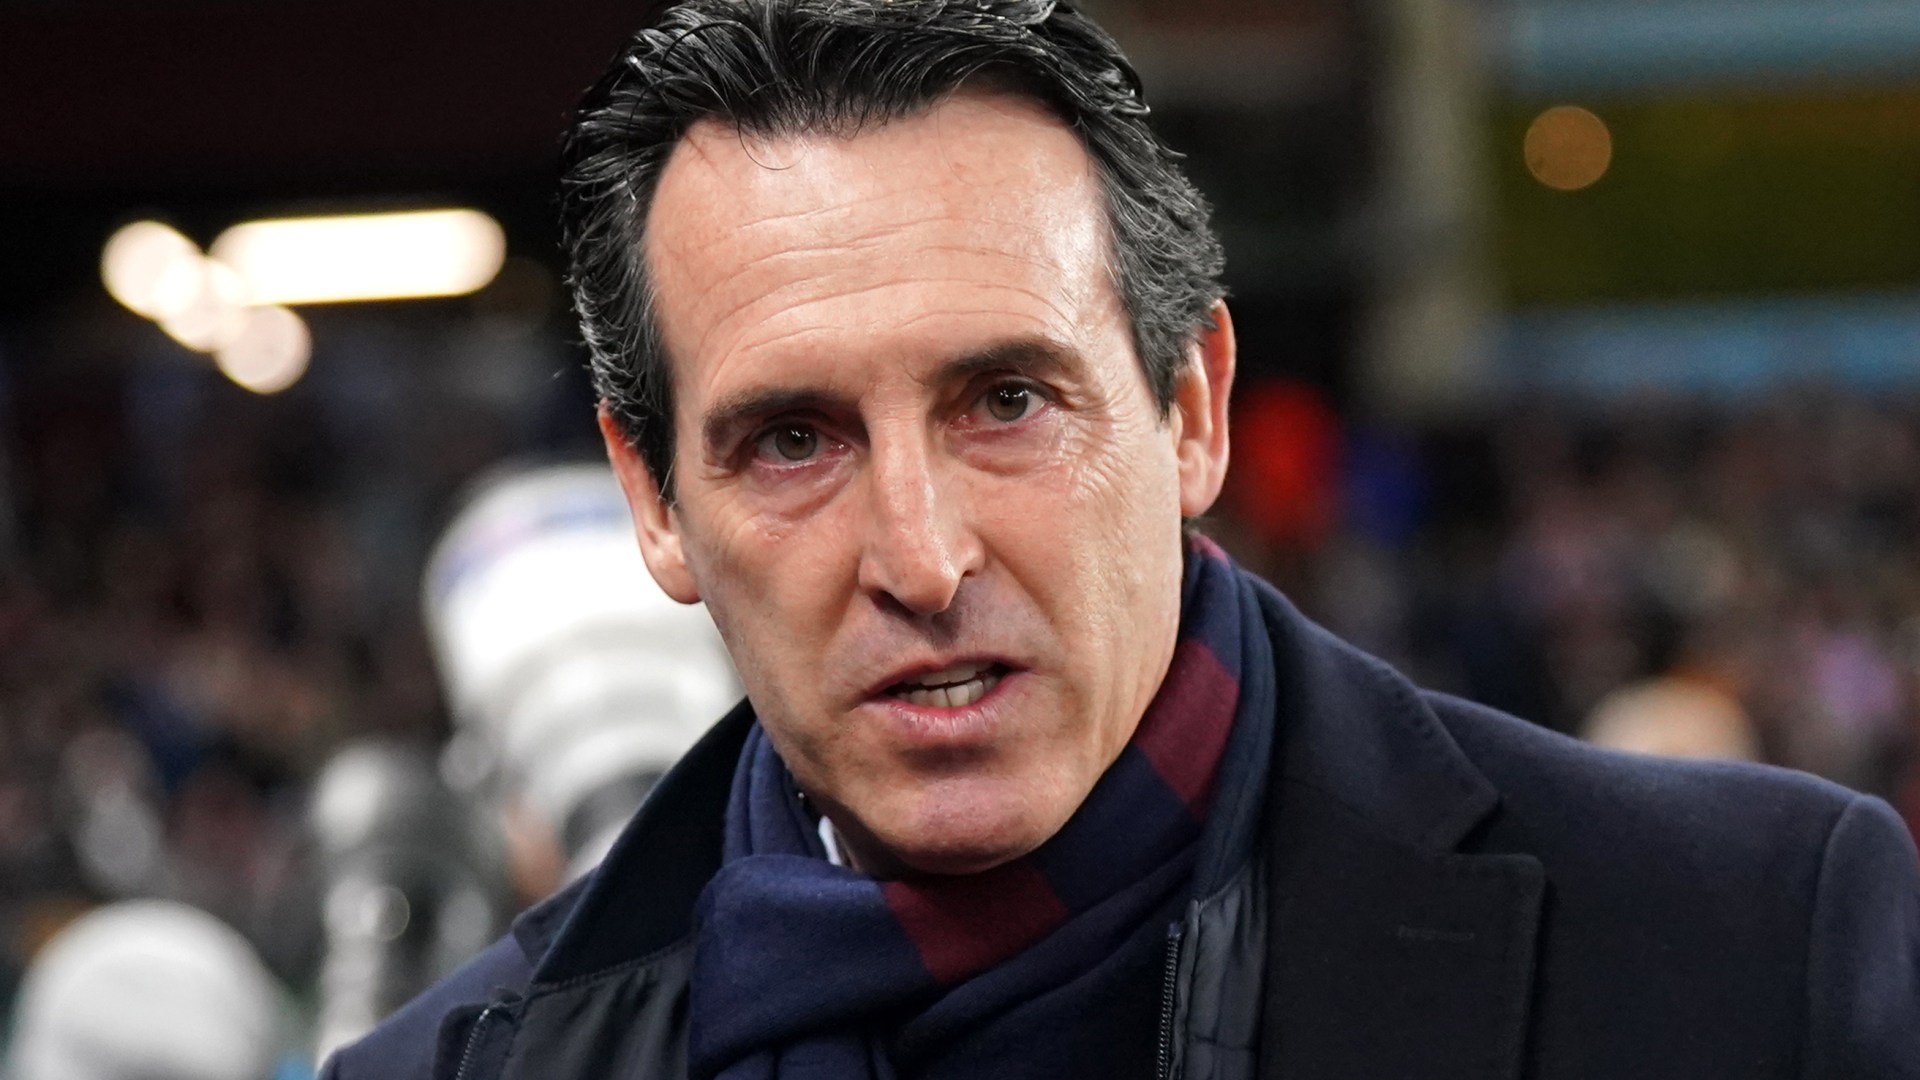 Premier League title-chasers Aston Villa tell out-of-favour duo they 'can go' as boss Emery aims to bring two players in